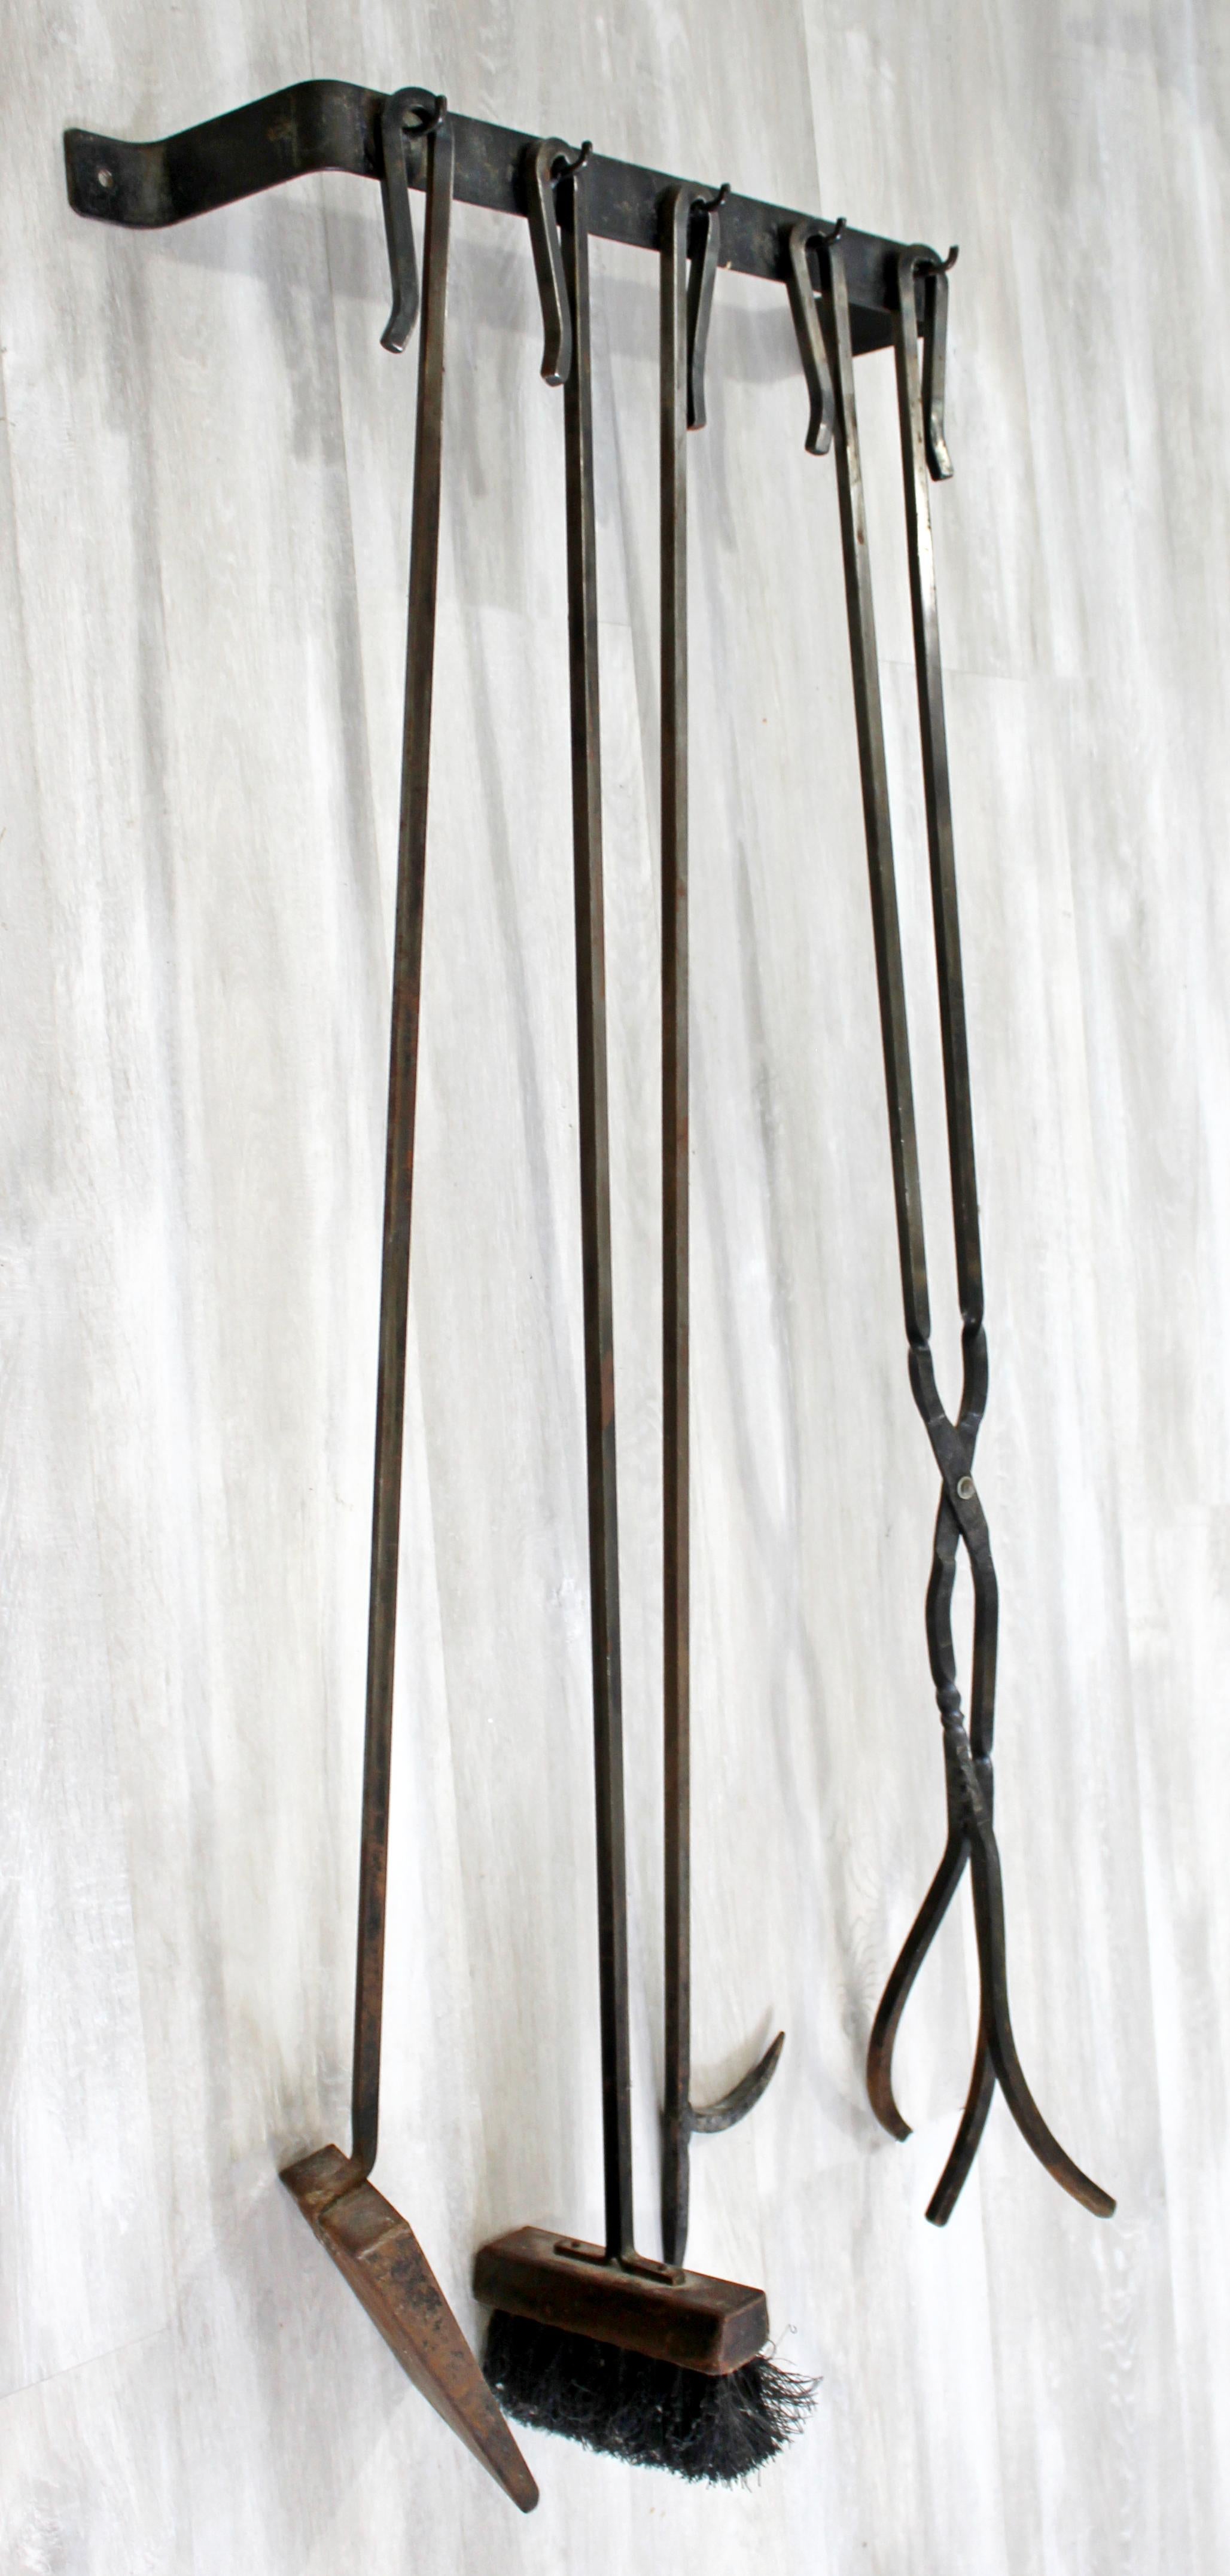 For your consideration is a handsome, hand forged set of iron fireplace tools, including a shovel, brush and poker, circa 1960s. In very good vintage condition, with a patina to match its age. The dimensions are 21.5